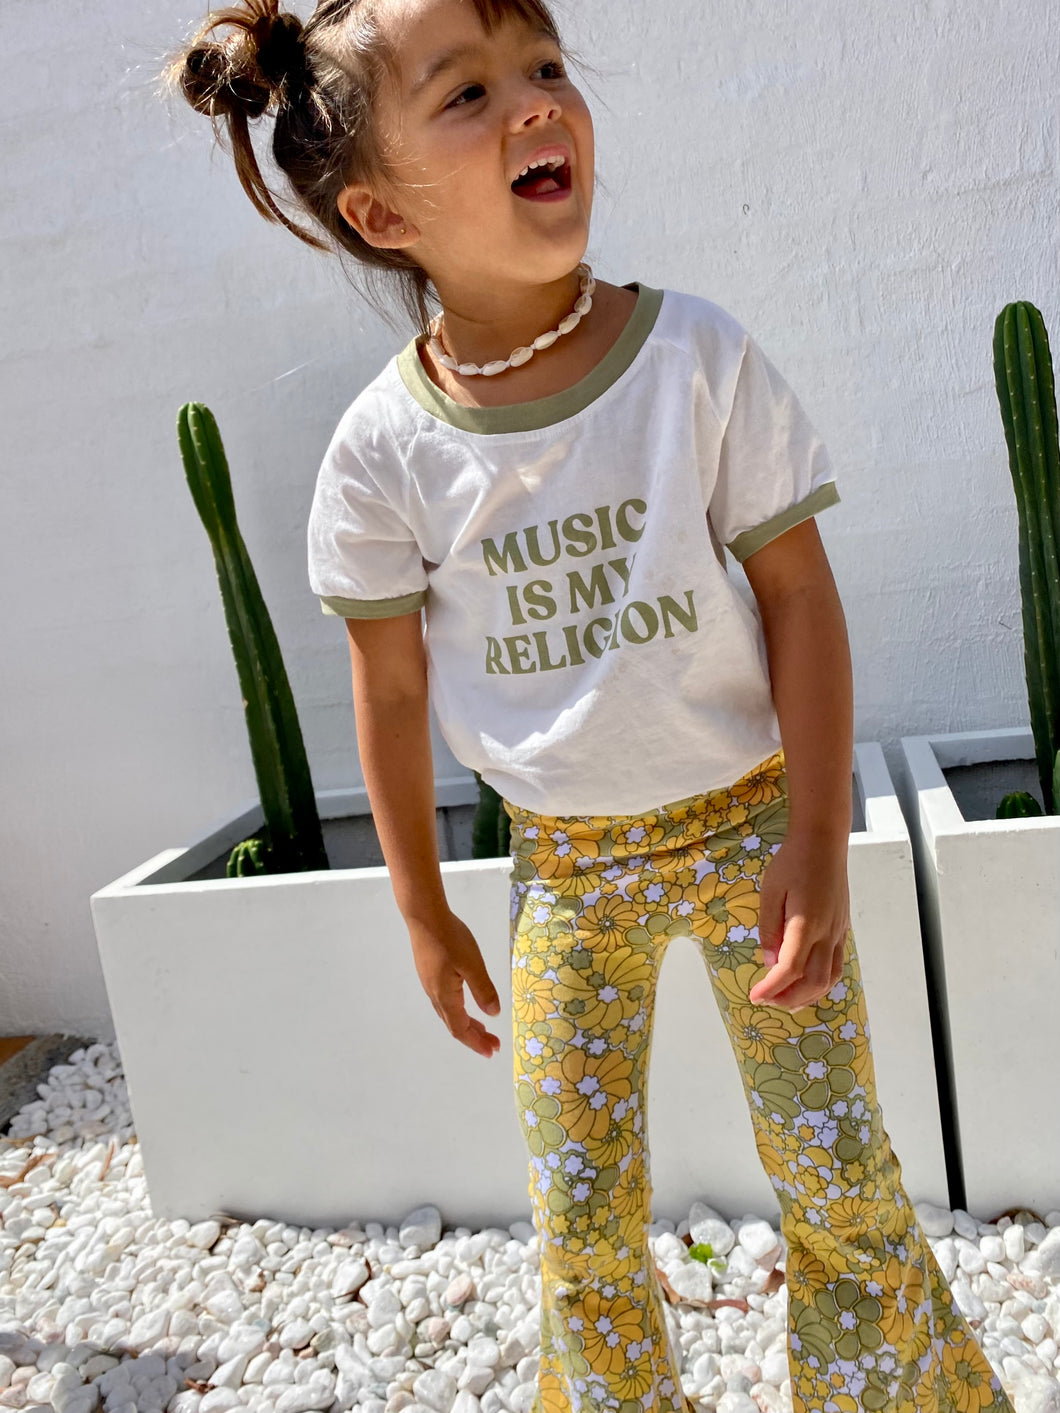 MUSIC IS MY RELIGION Tee - White/Olive (Organic)